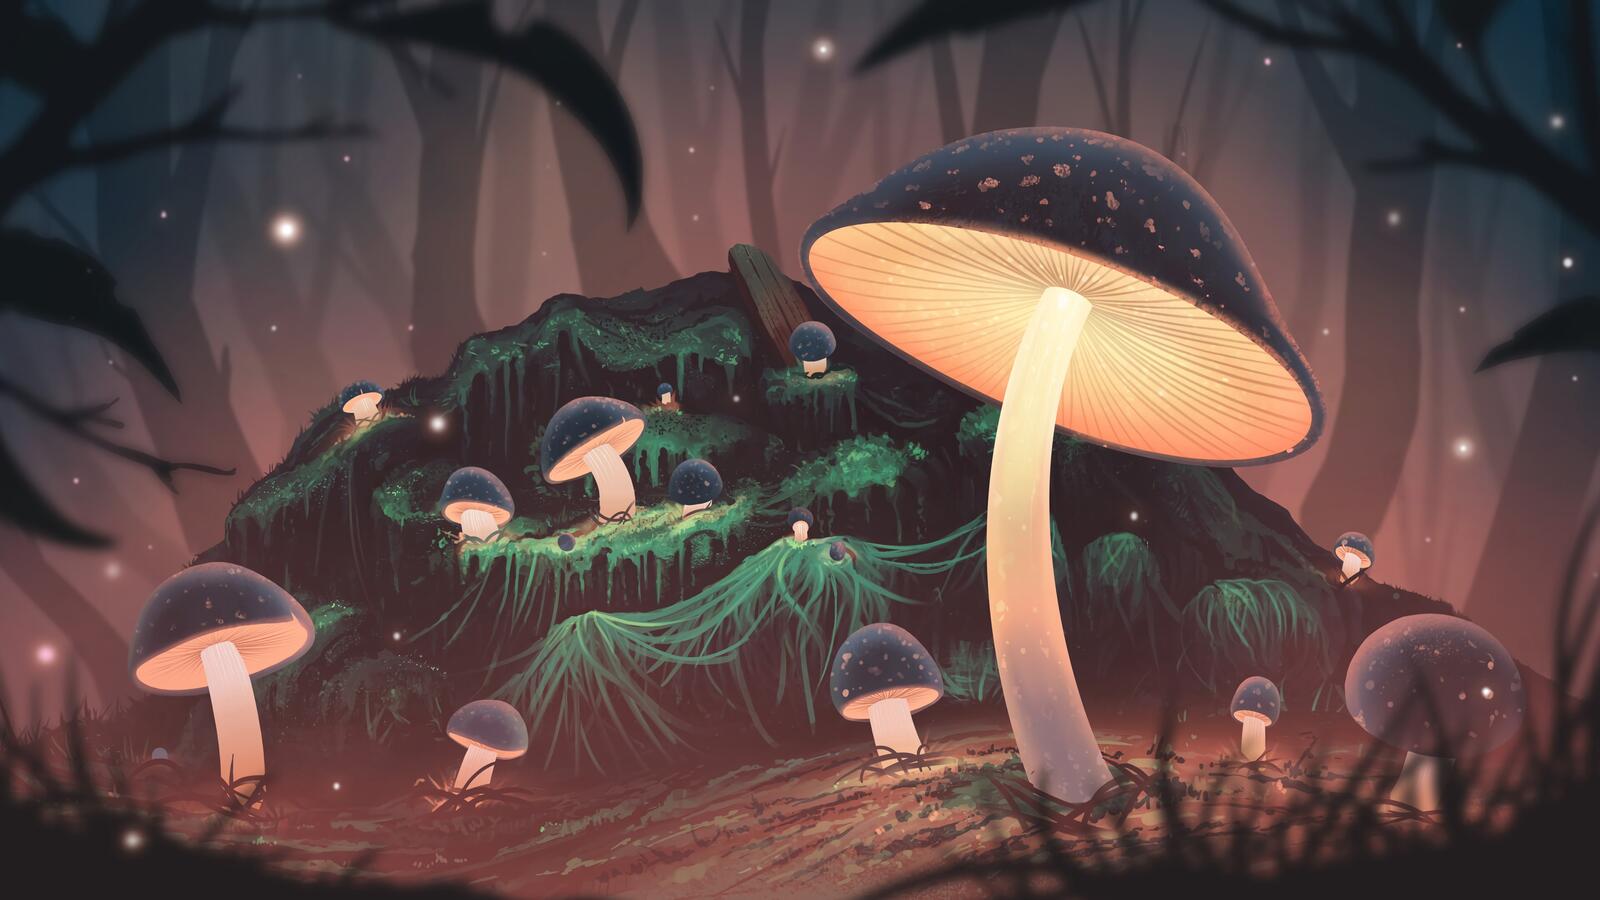 Free photo Luminous mushrooms in a fantasy forest